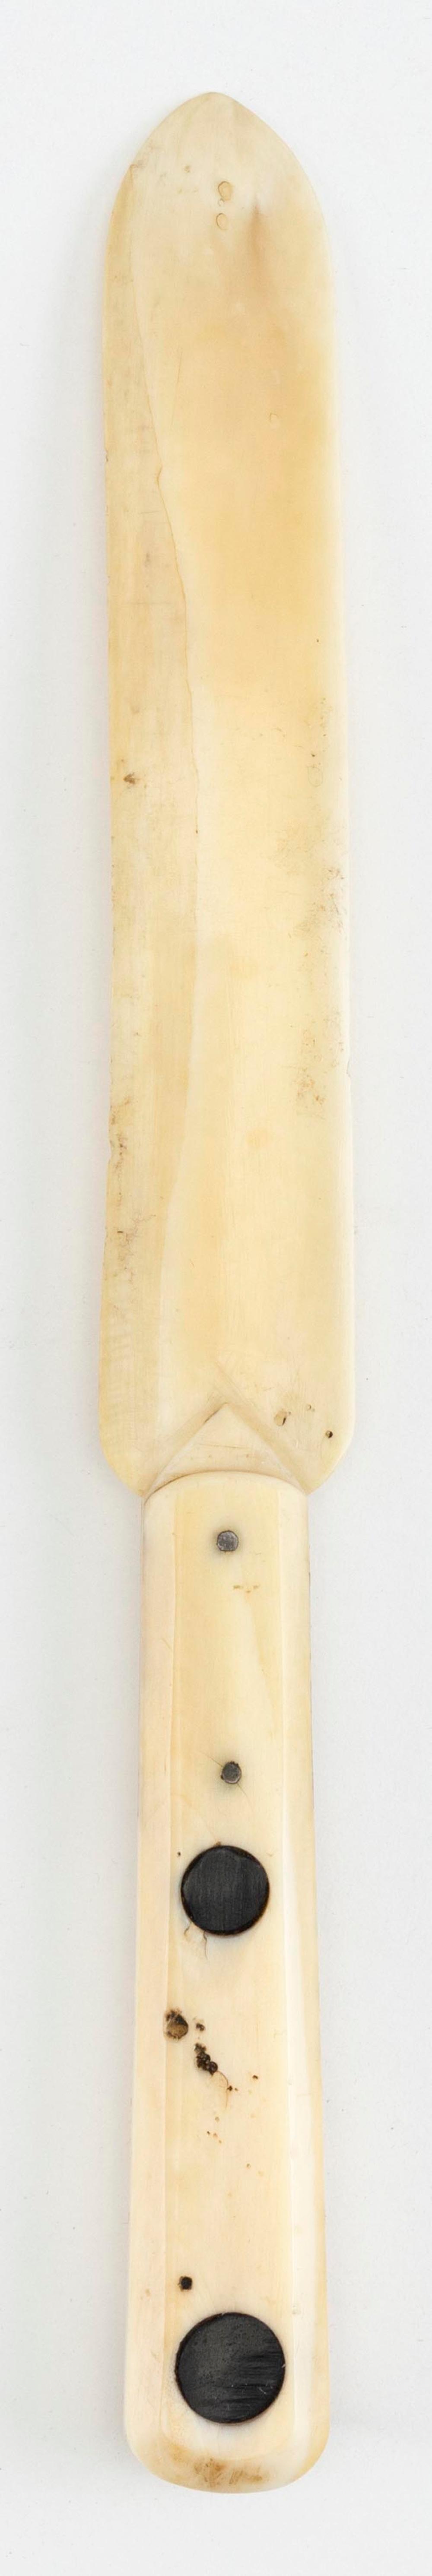 WHALE IVORY KNIFE 19TH CENTURY 2f2866